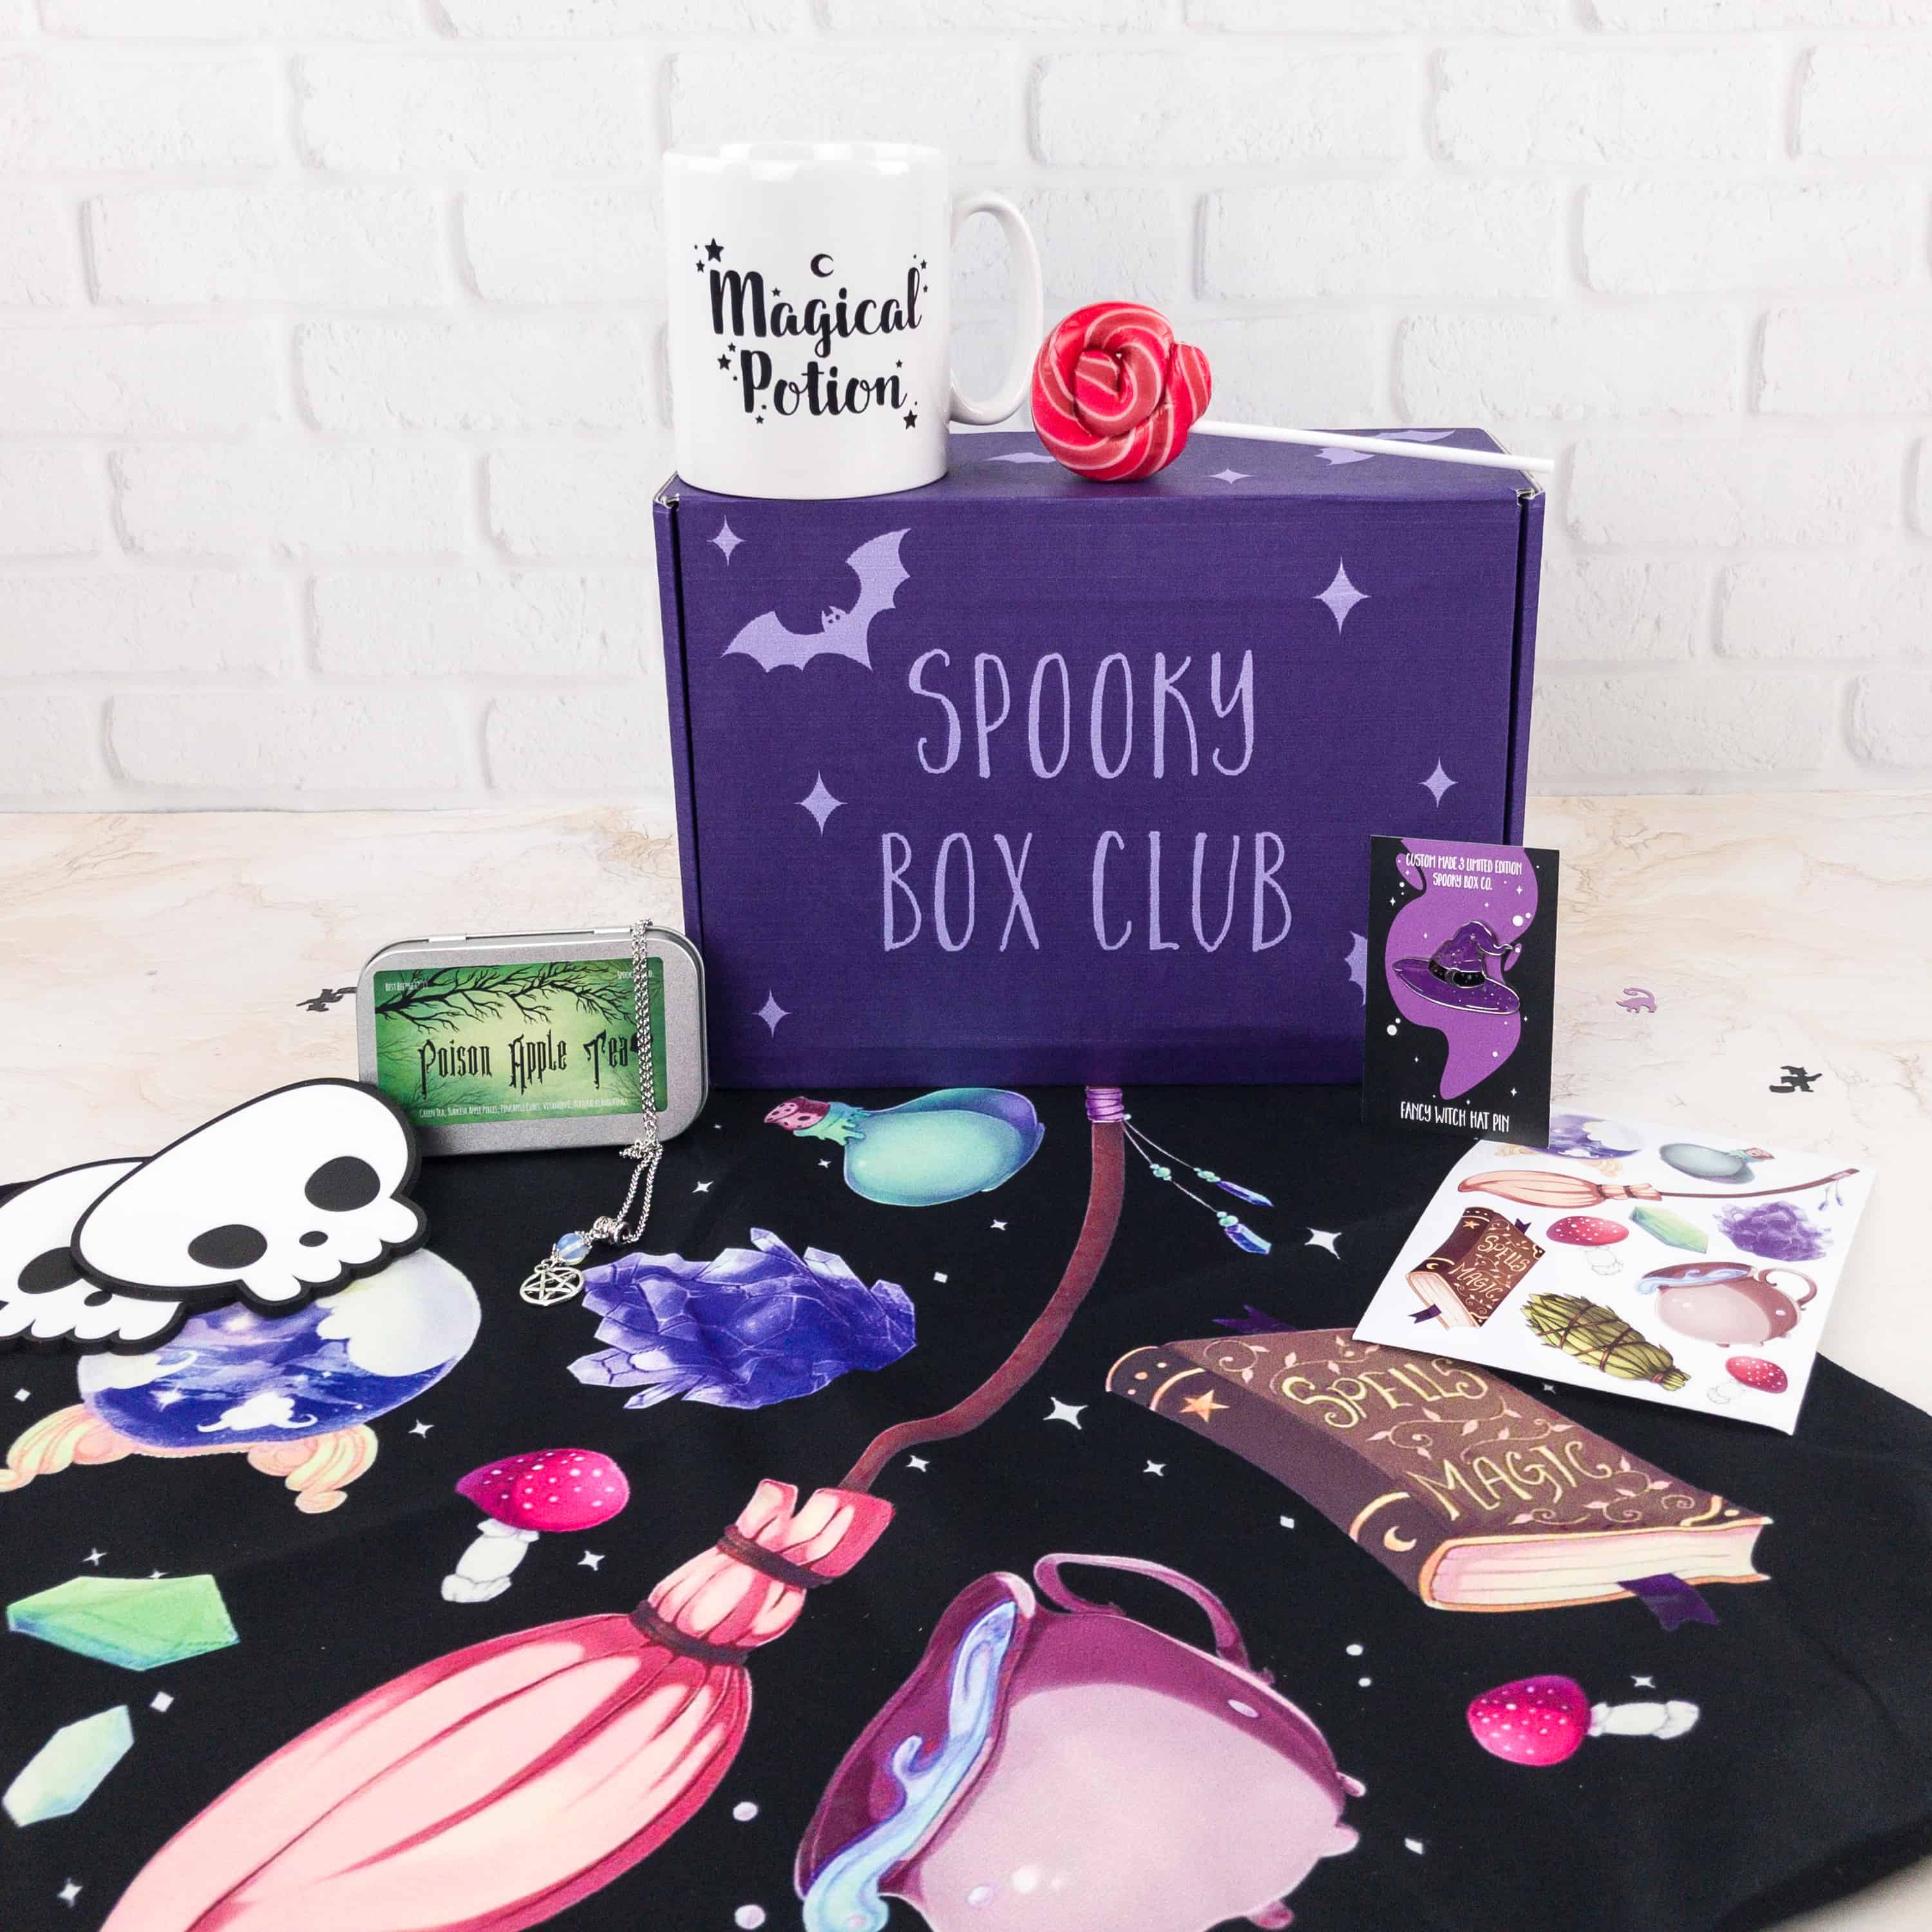 Goth Subscription Boxes - Hello Subscription %